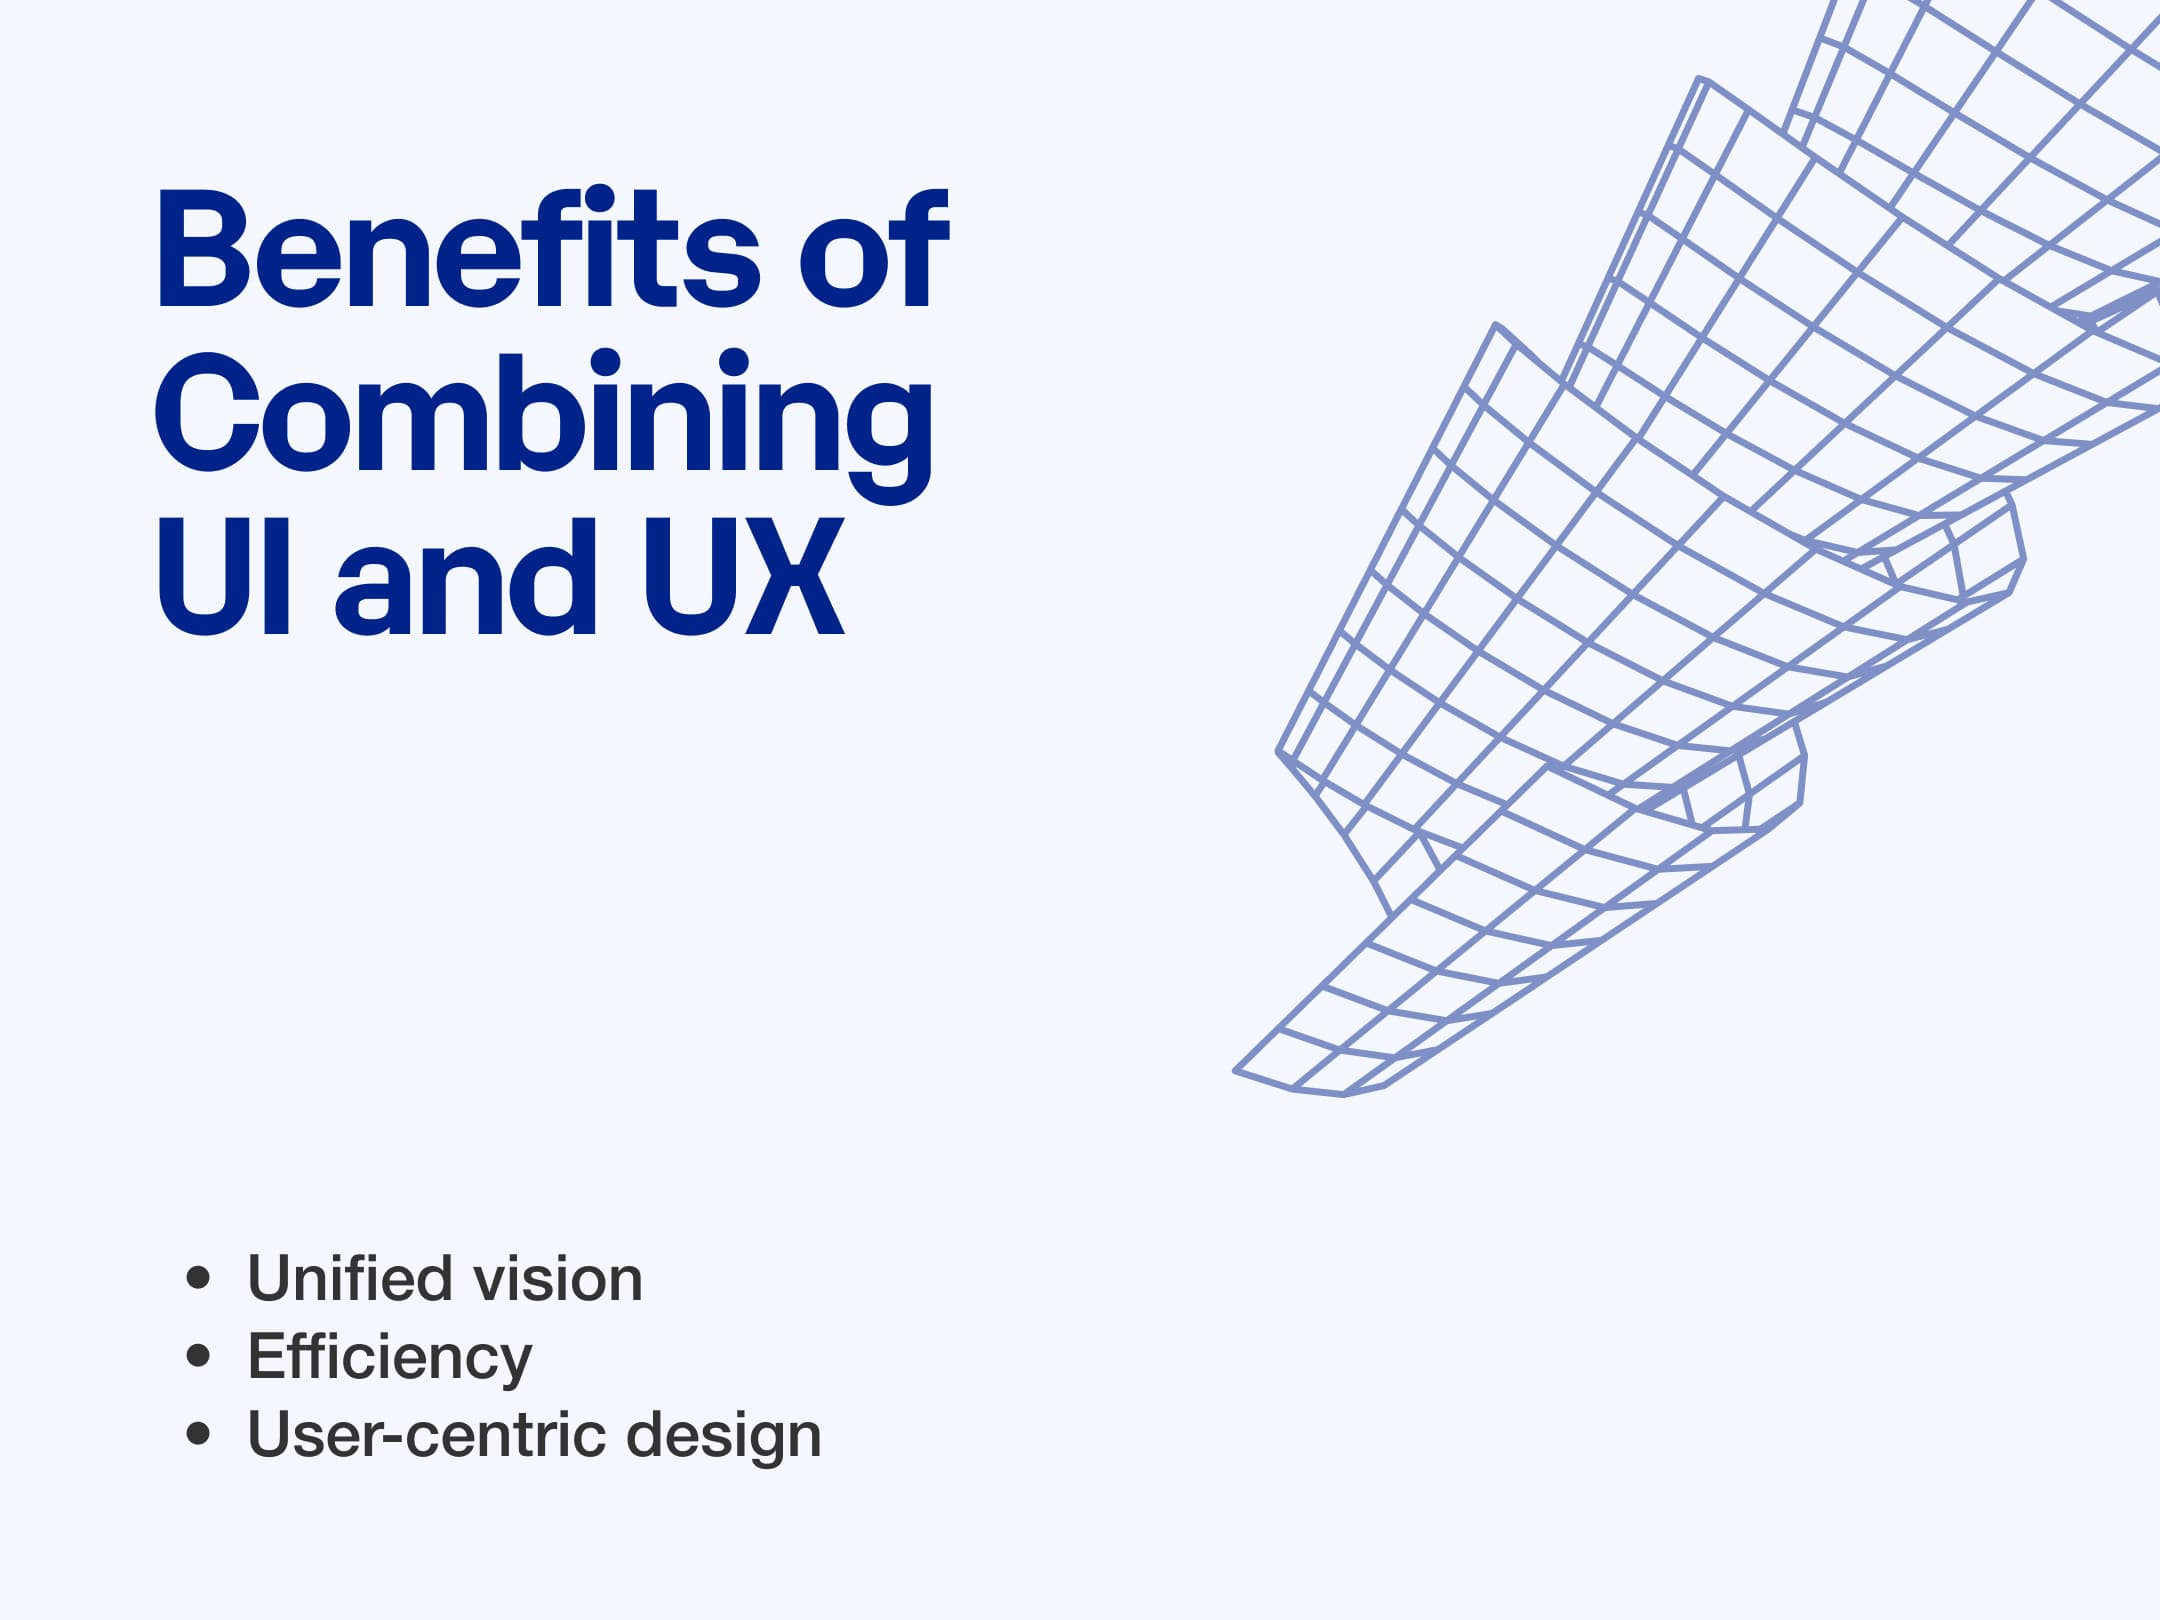 Benefits of Combining both UI and UX